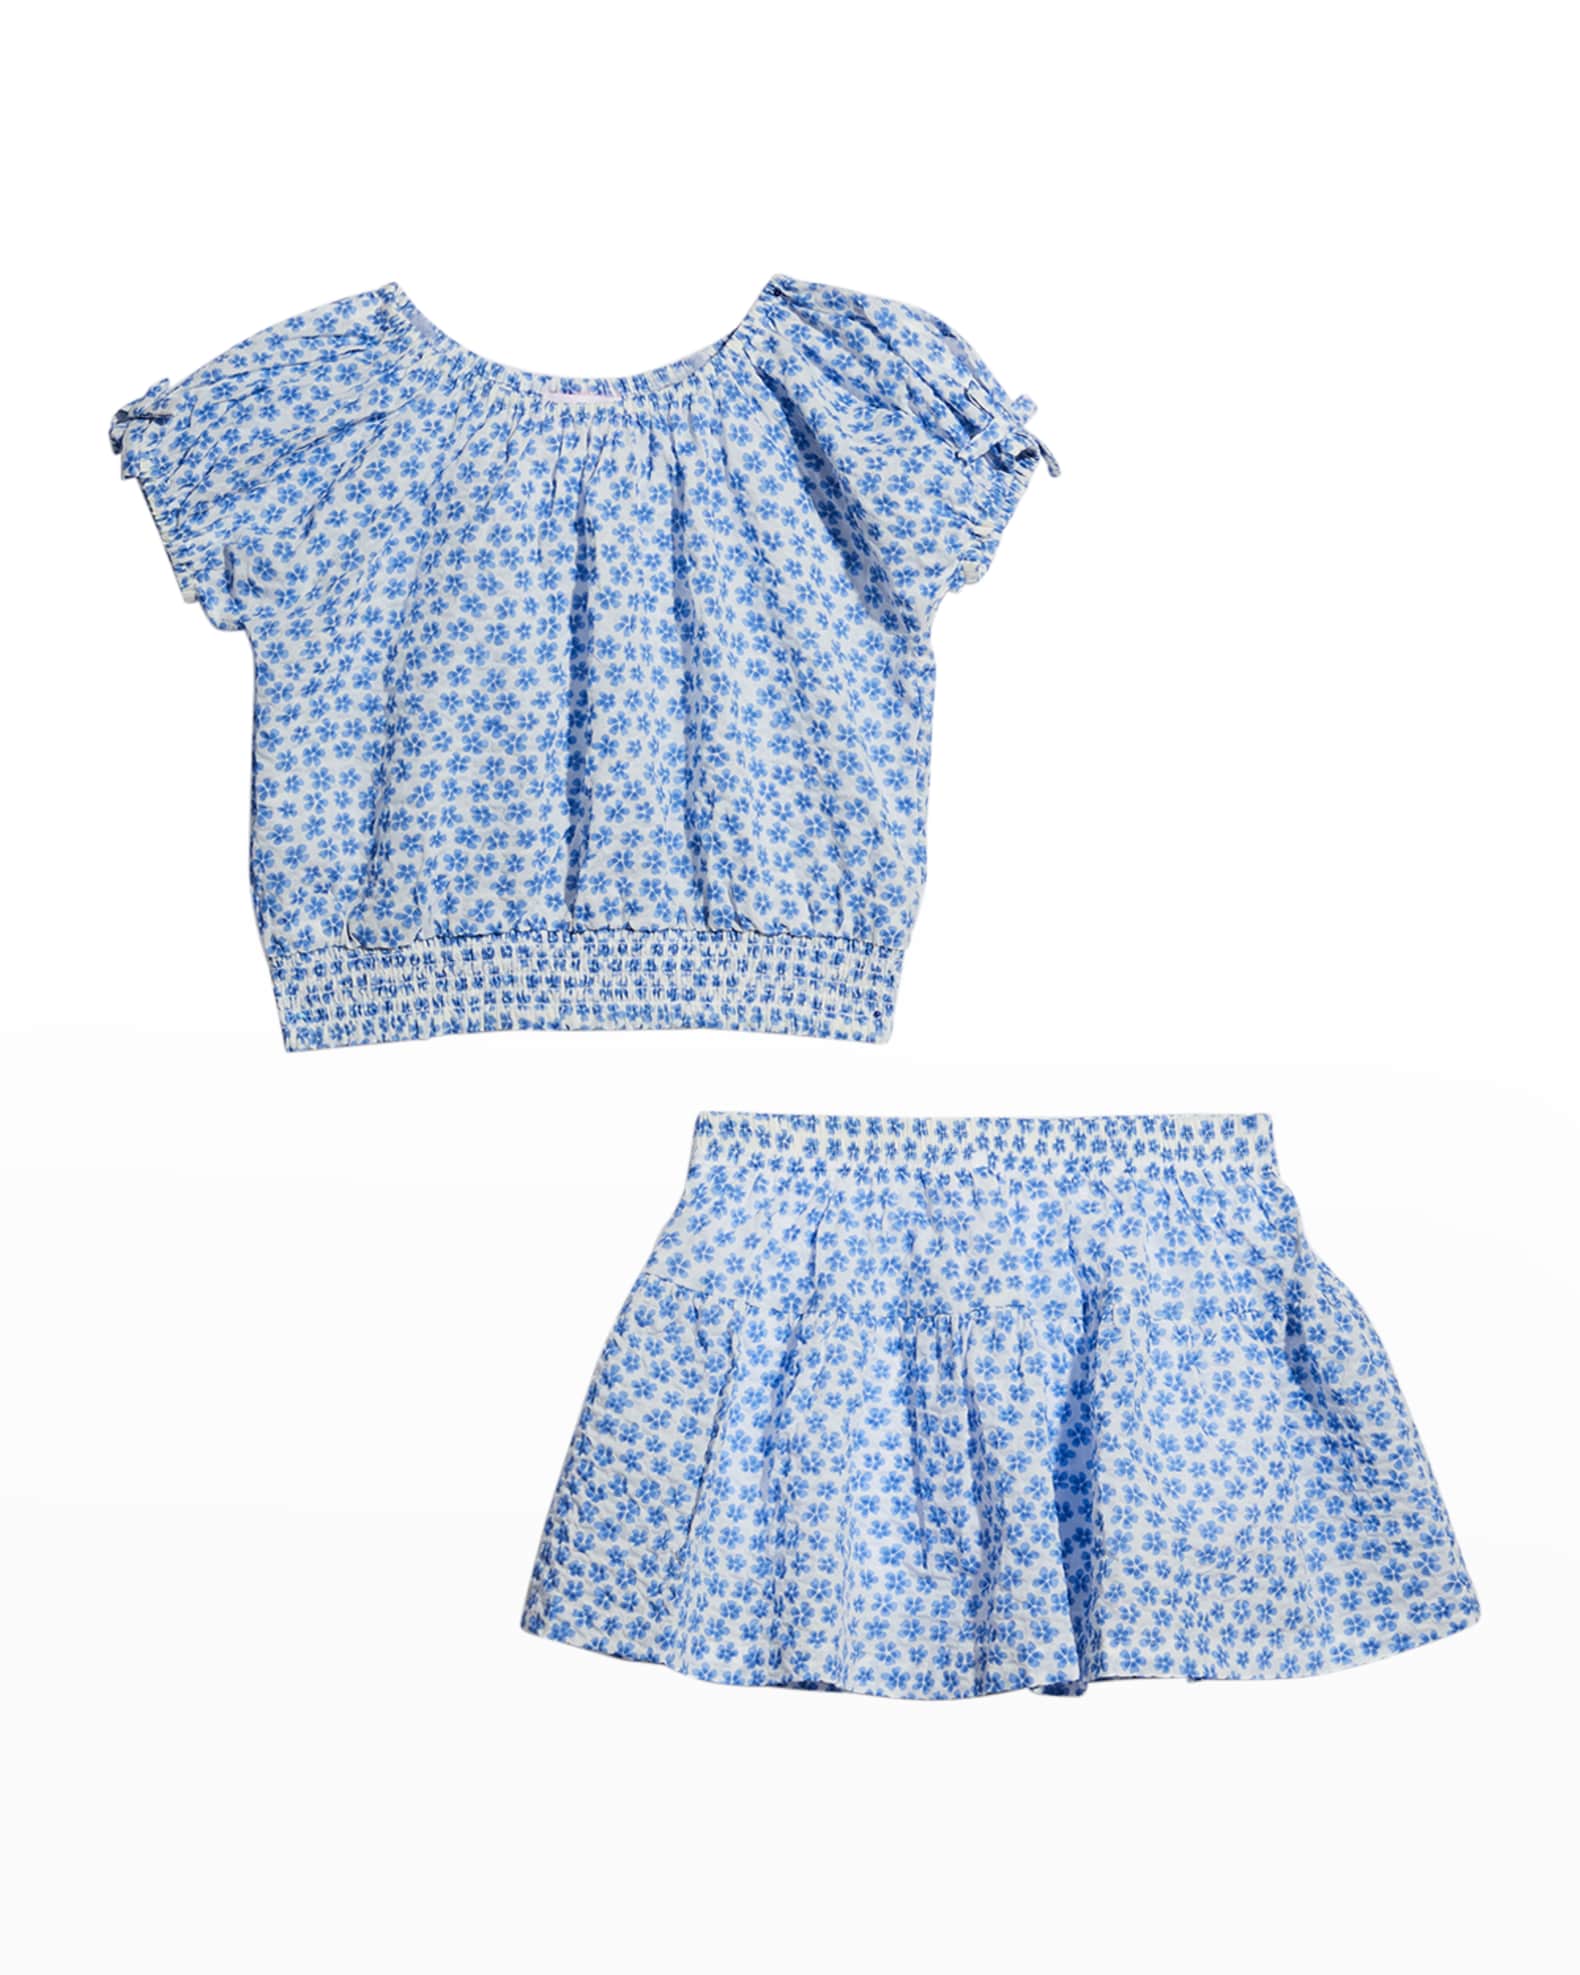 Ditsy Blue Floral Cotton Skirt Set - Twinkle Twinkle Little One